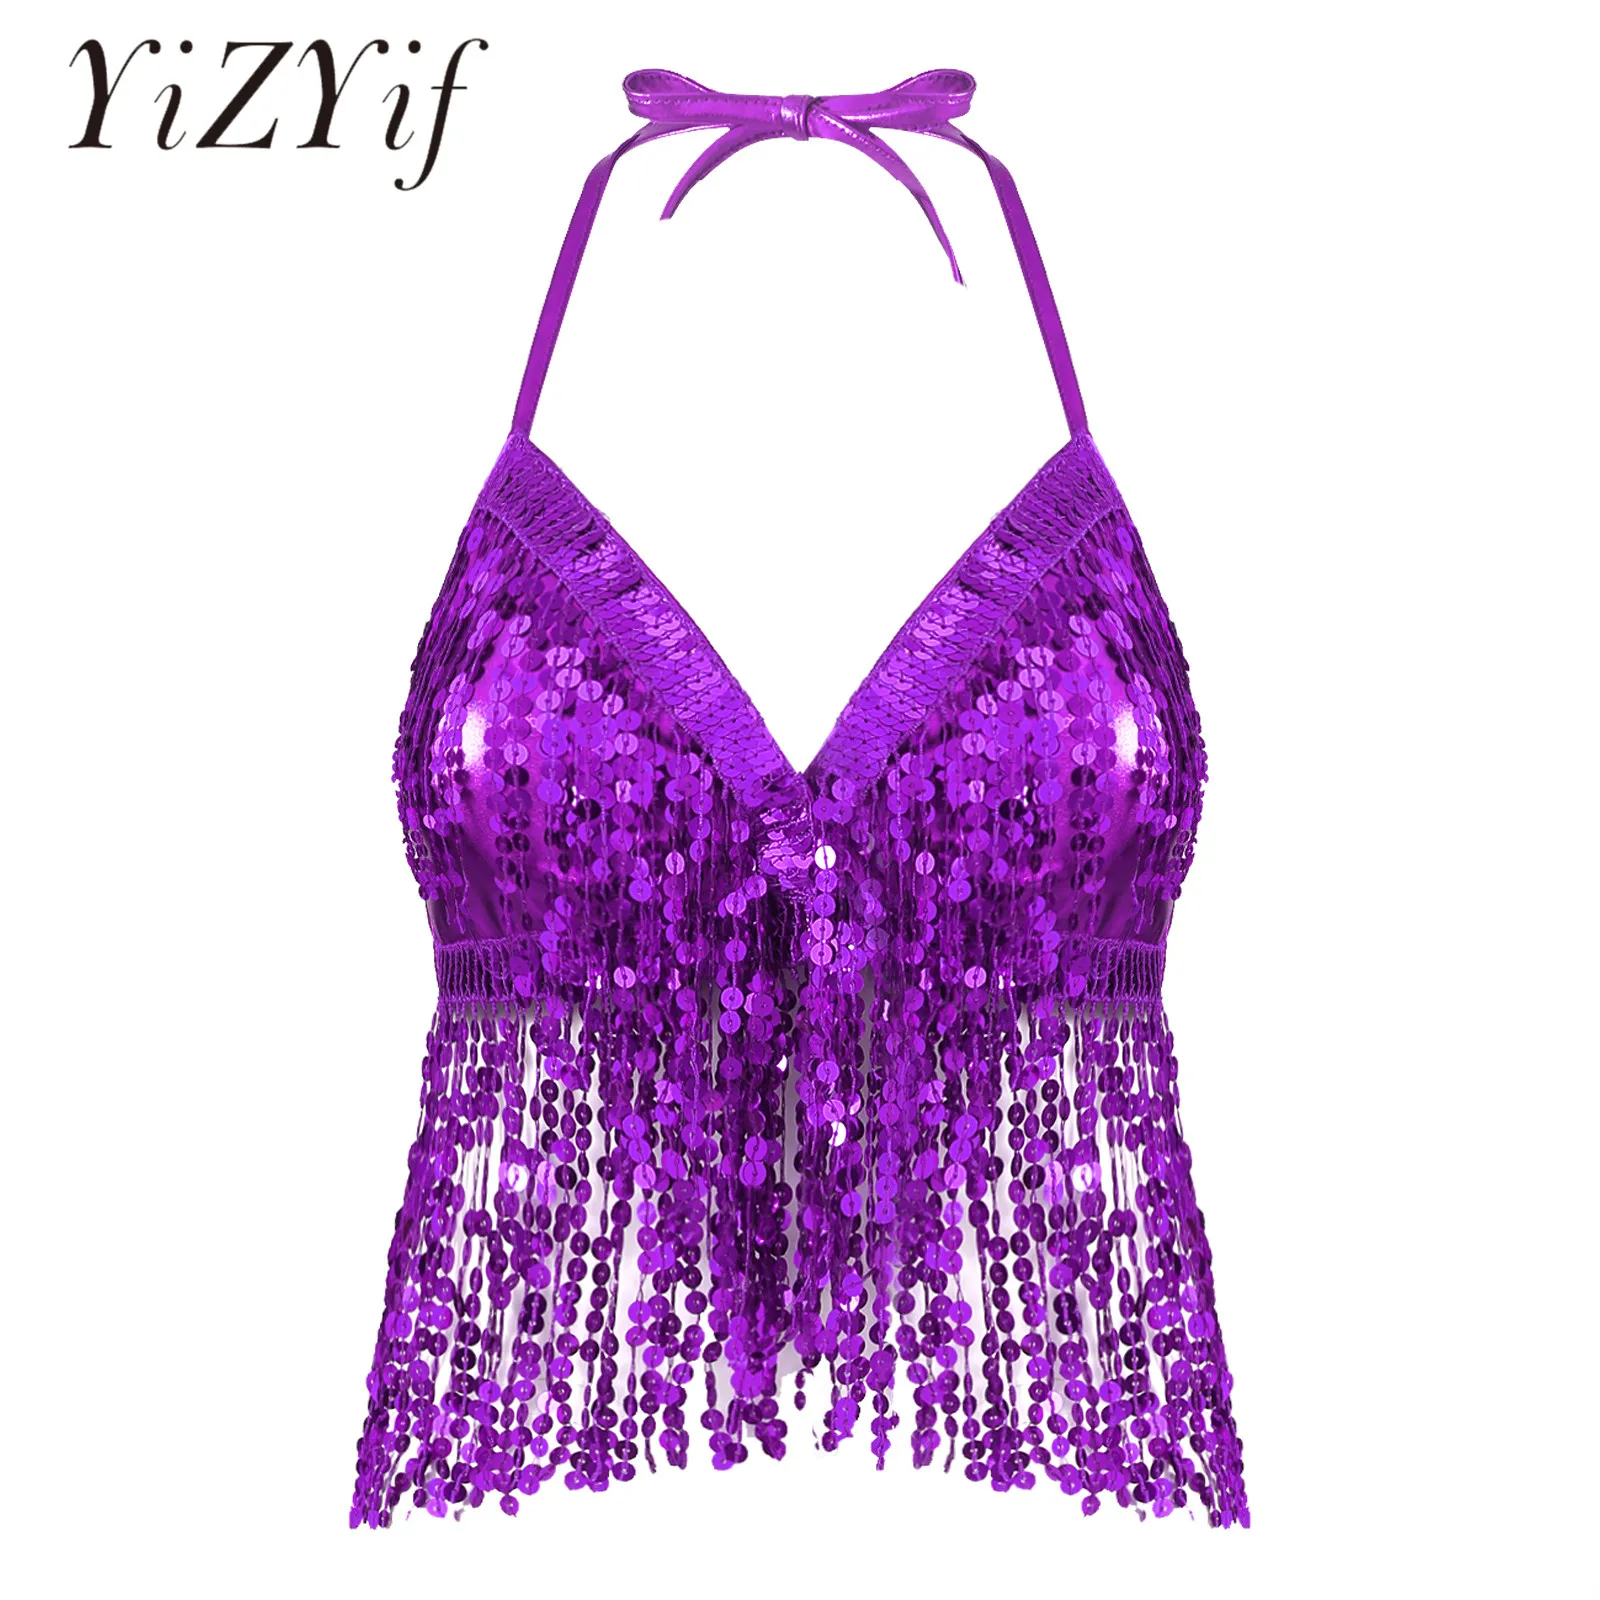 

Womens Shiny Sequin Fringed Halter Crop Top Rave Party Festival Crop Top for Belly Dancing Lace-up Padded Dance Bra Vest